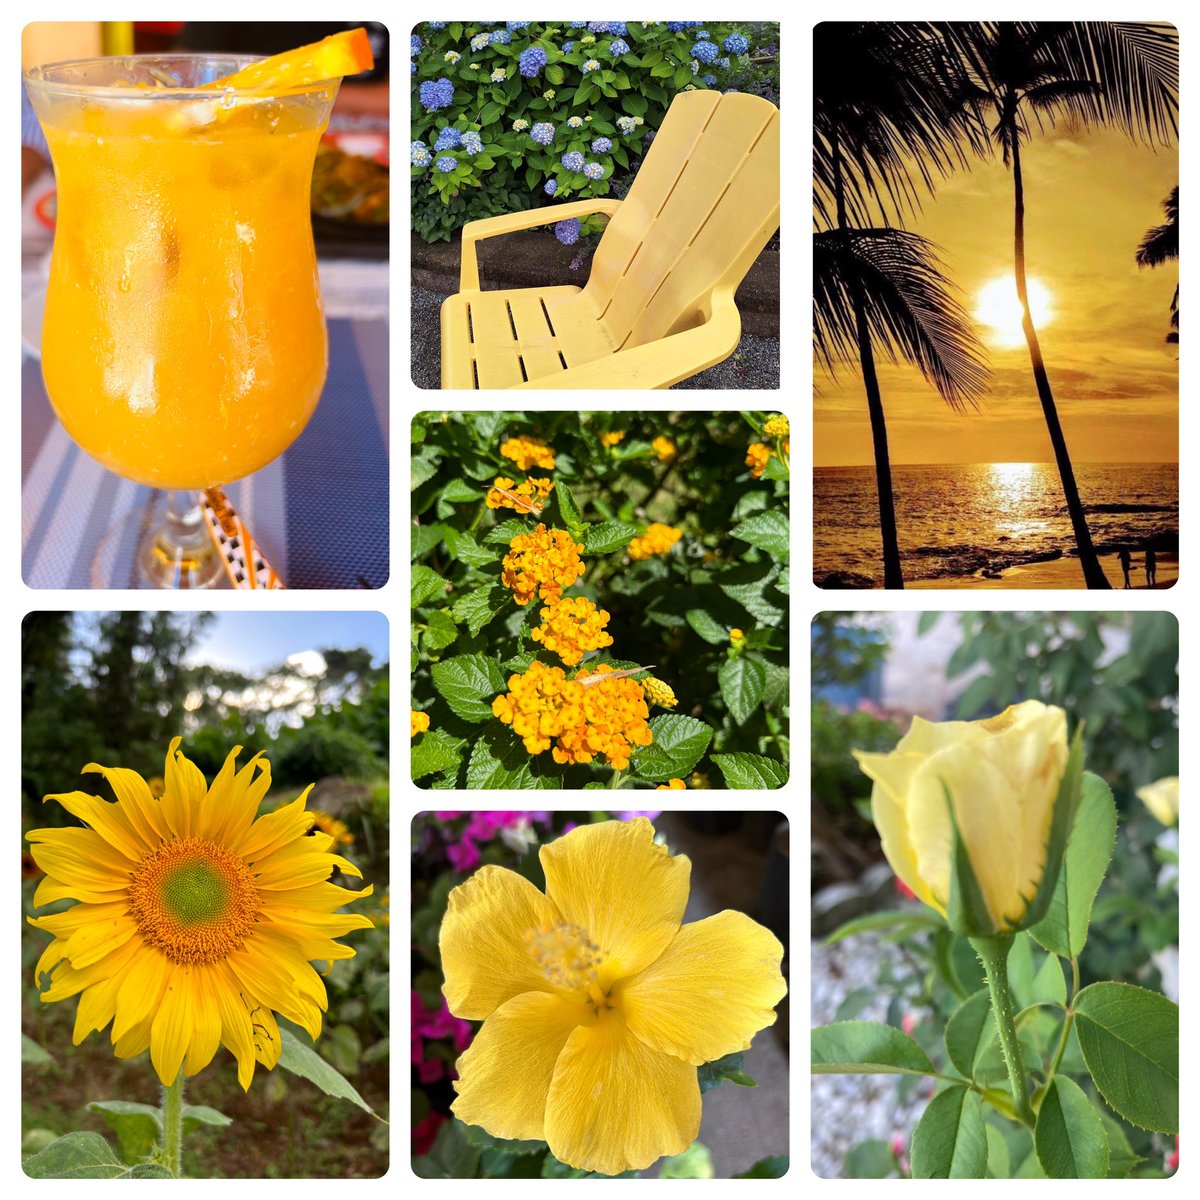 #SevenOnSunday
#SundayYellow
Sunday is the day to be free, to enjoy life and appreciate the little things that bring us JOY!
Let’s sit down in the garden, drink a glass of orange or mango juice and enjoy the sunset or the flowers and trees around us.🌻
🌼🍃💛🍃🌻🍃🐥🍃🌞🍃🌼🍃🐥